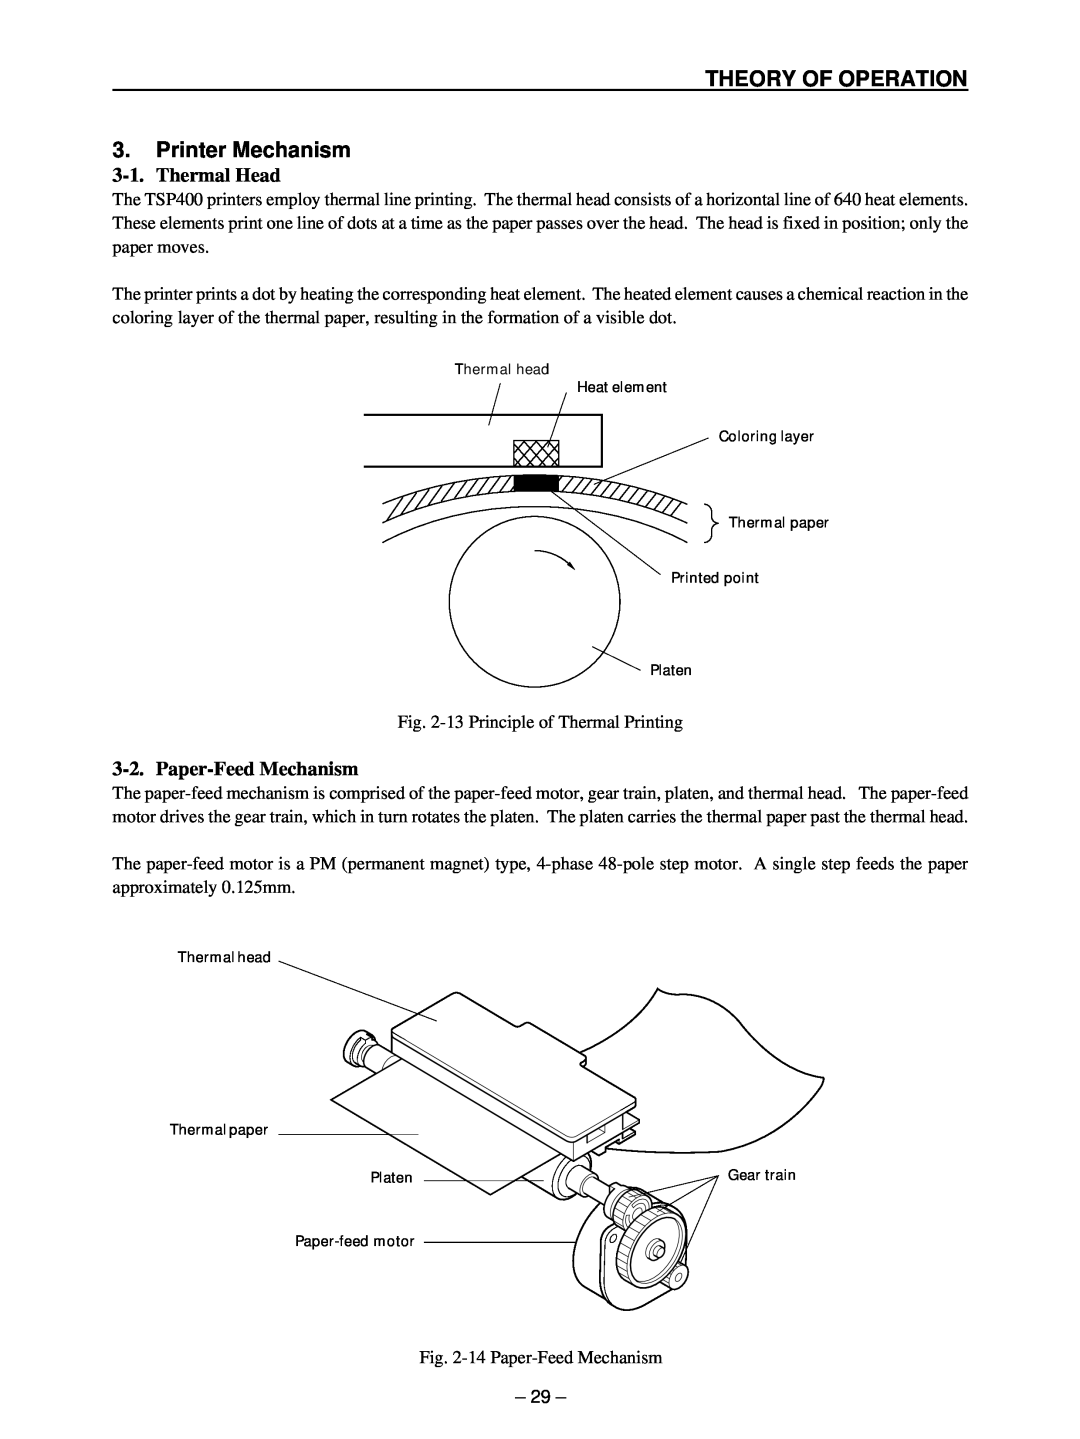 Star Micronics TSP400 technical manual THEORY OF OPERATION 3. Printer Mechanism, Thermal Head, Paper-Feed Mechanism 